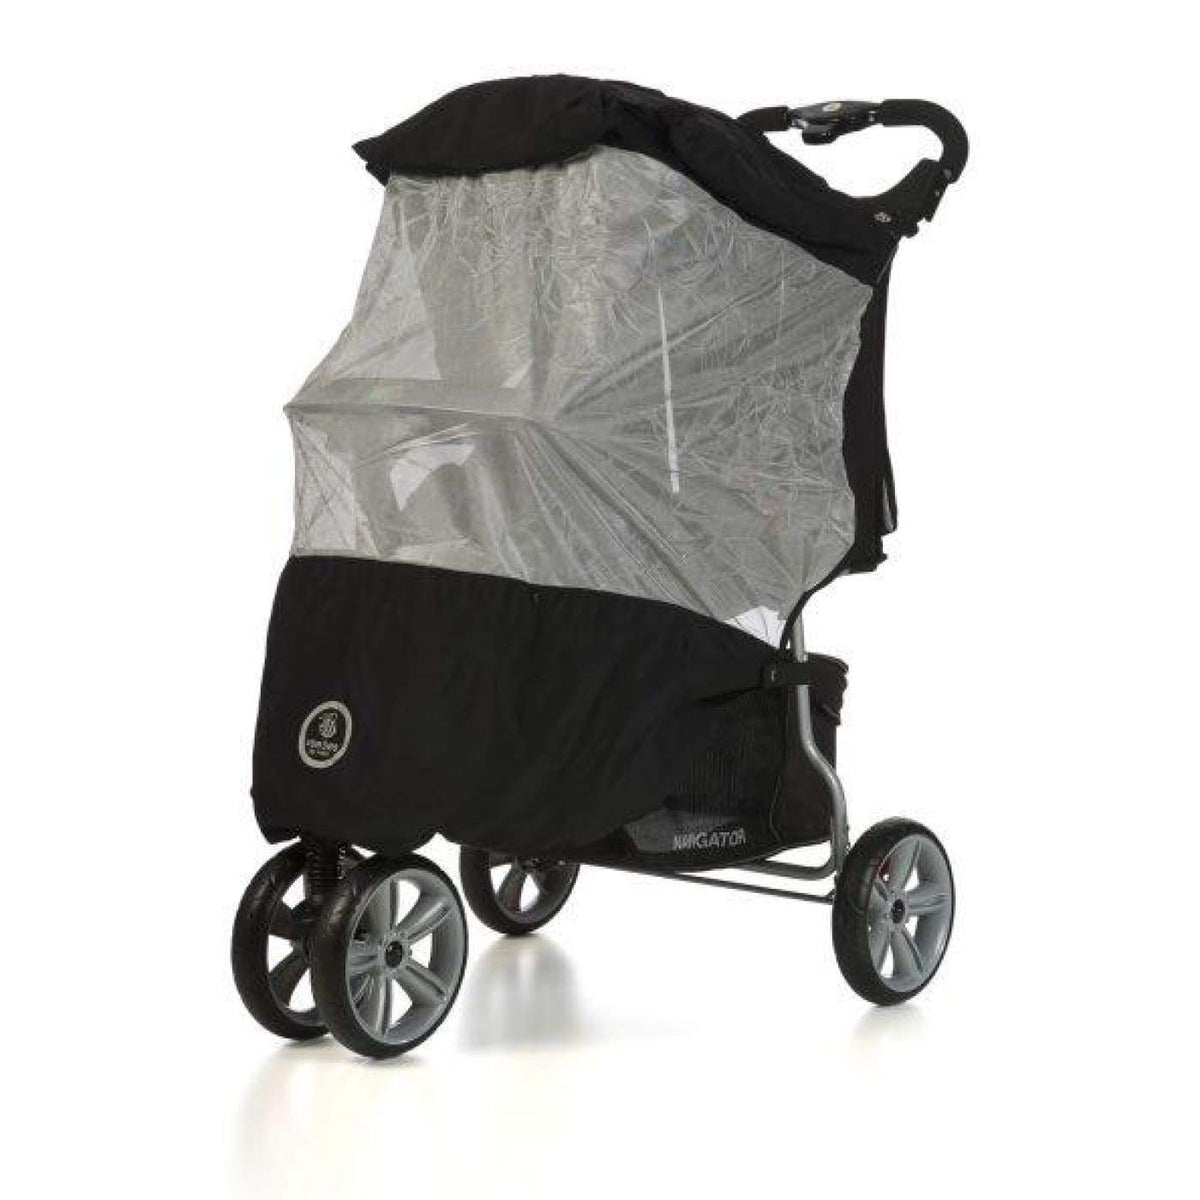 Veebee Sun Stopper for 1 - Black/Silver - PRAMS &amp; STROLLERS - SUN COVERS/WEATHER SHIELDS